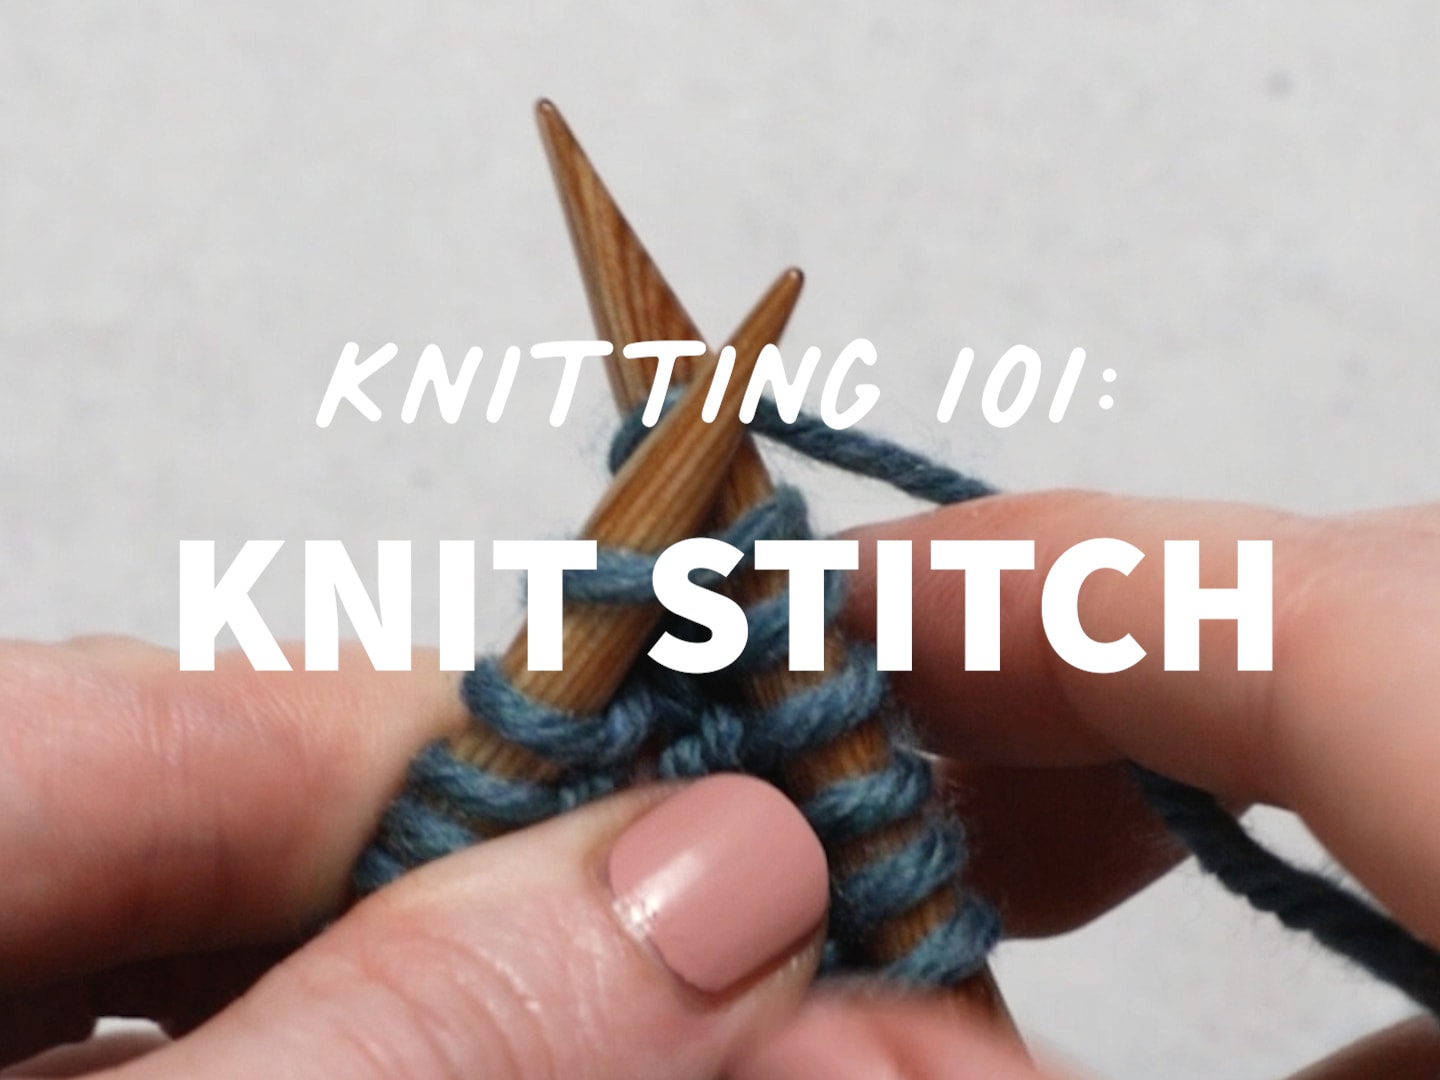 How to Knit the Knit Stitch (k) for Beginners - Sarah Maker